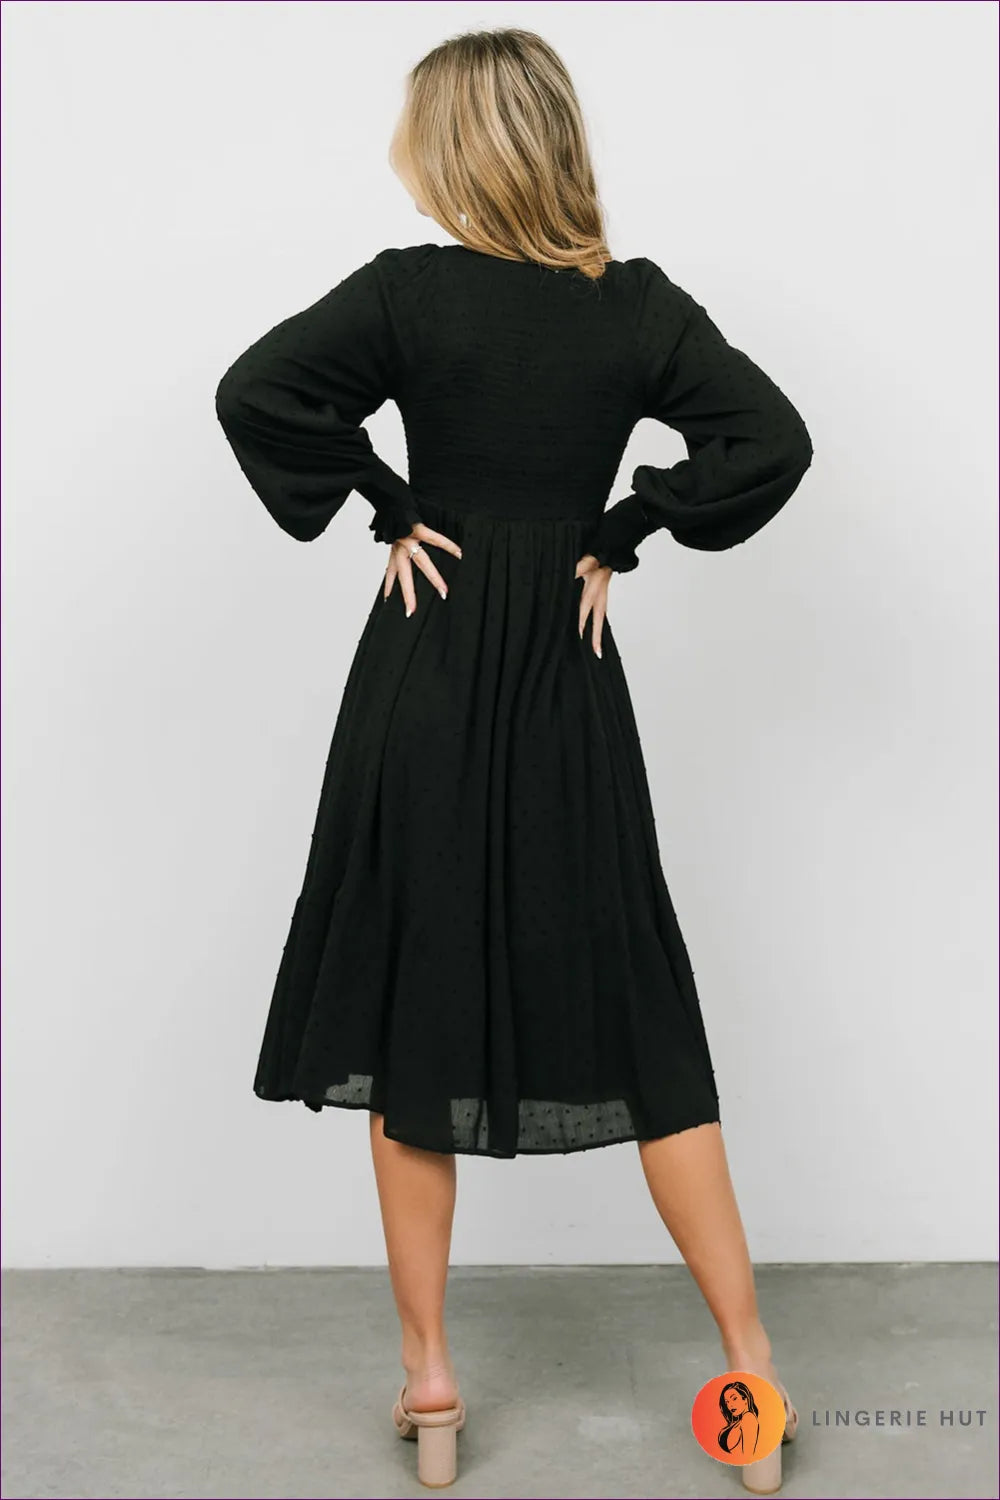 Elevate Your Style With Our Lantern Sleeve Midi Dress. Modern Chic, Exquisite Ruffle Design, And Premium